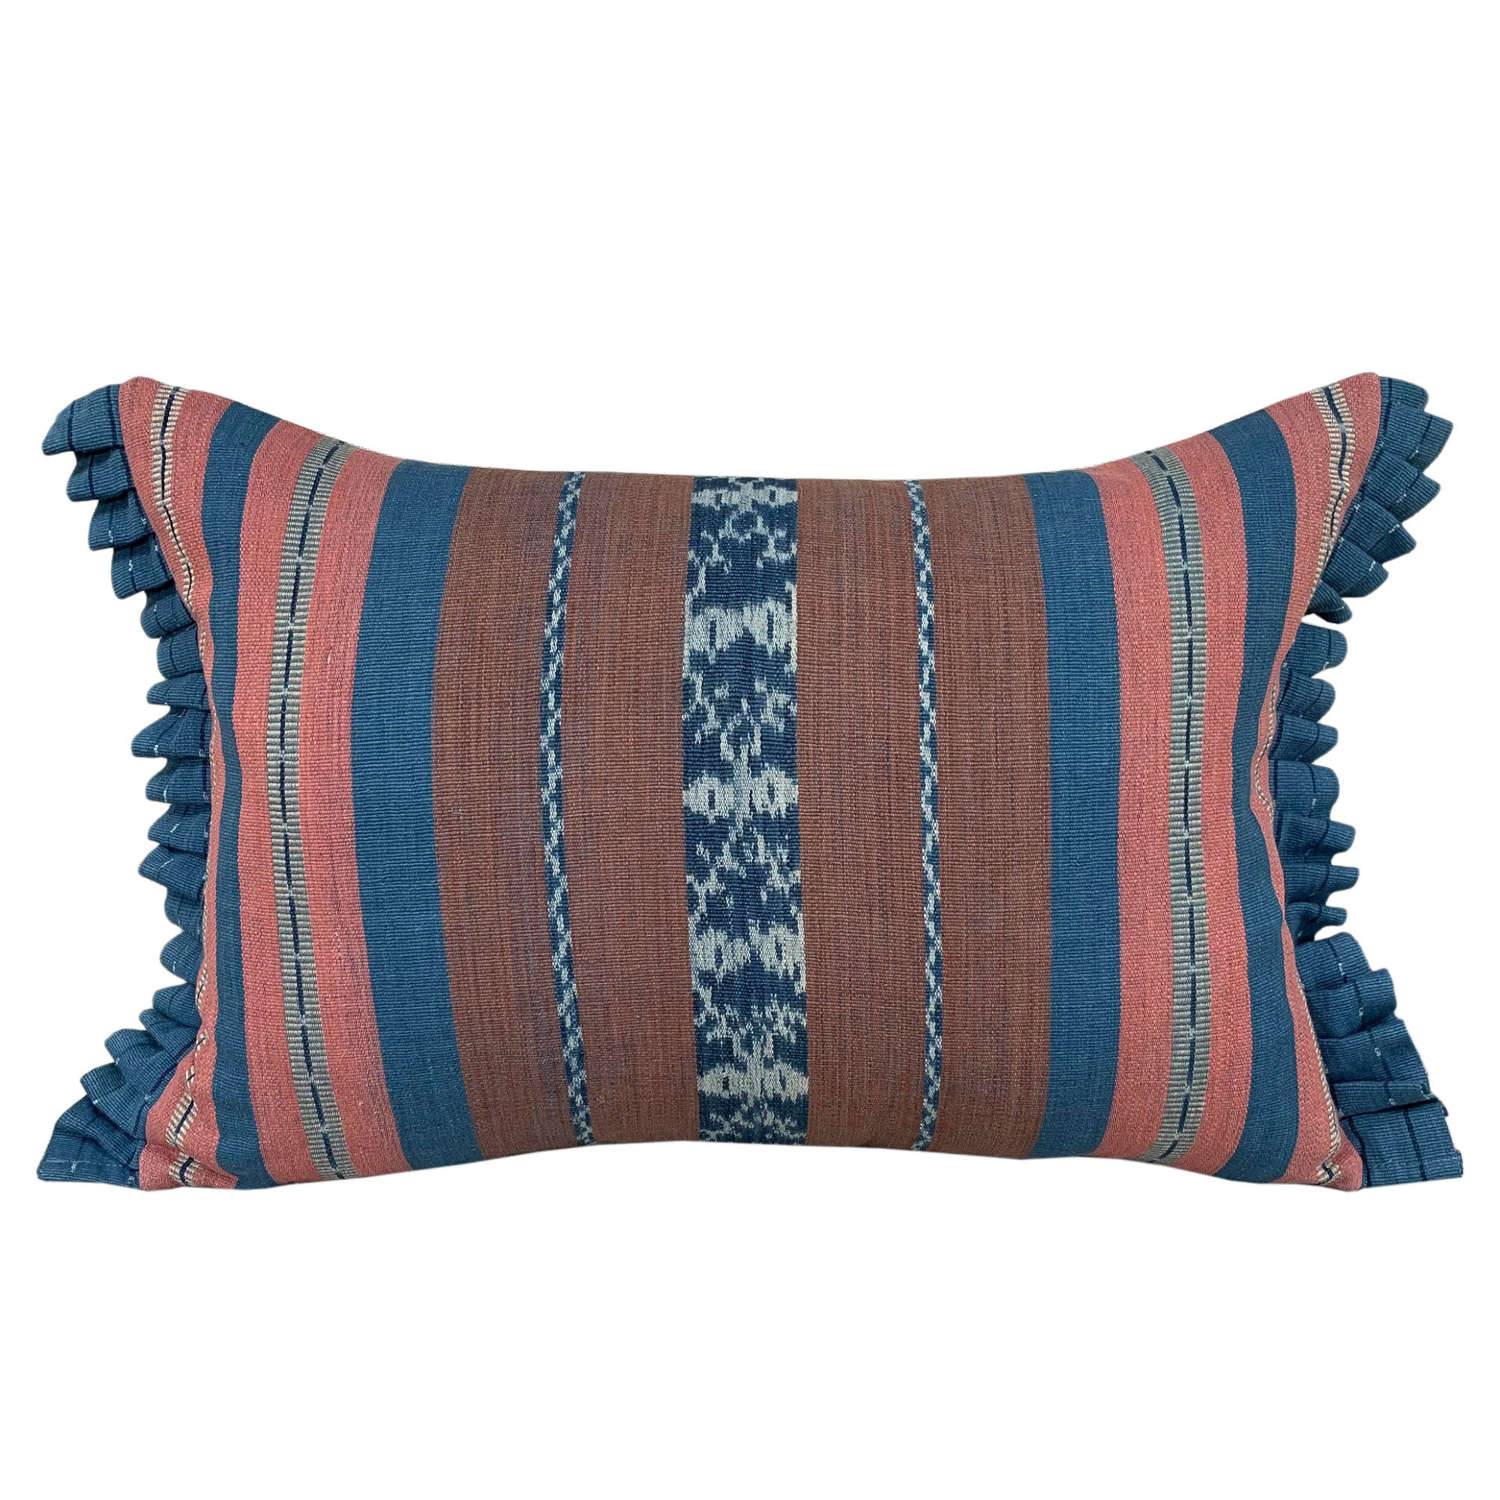 Flores cushions with pleated side trim